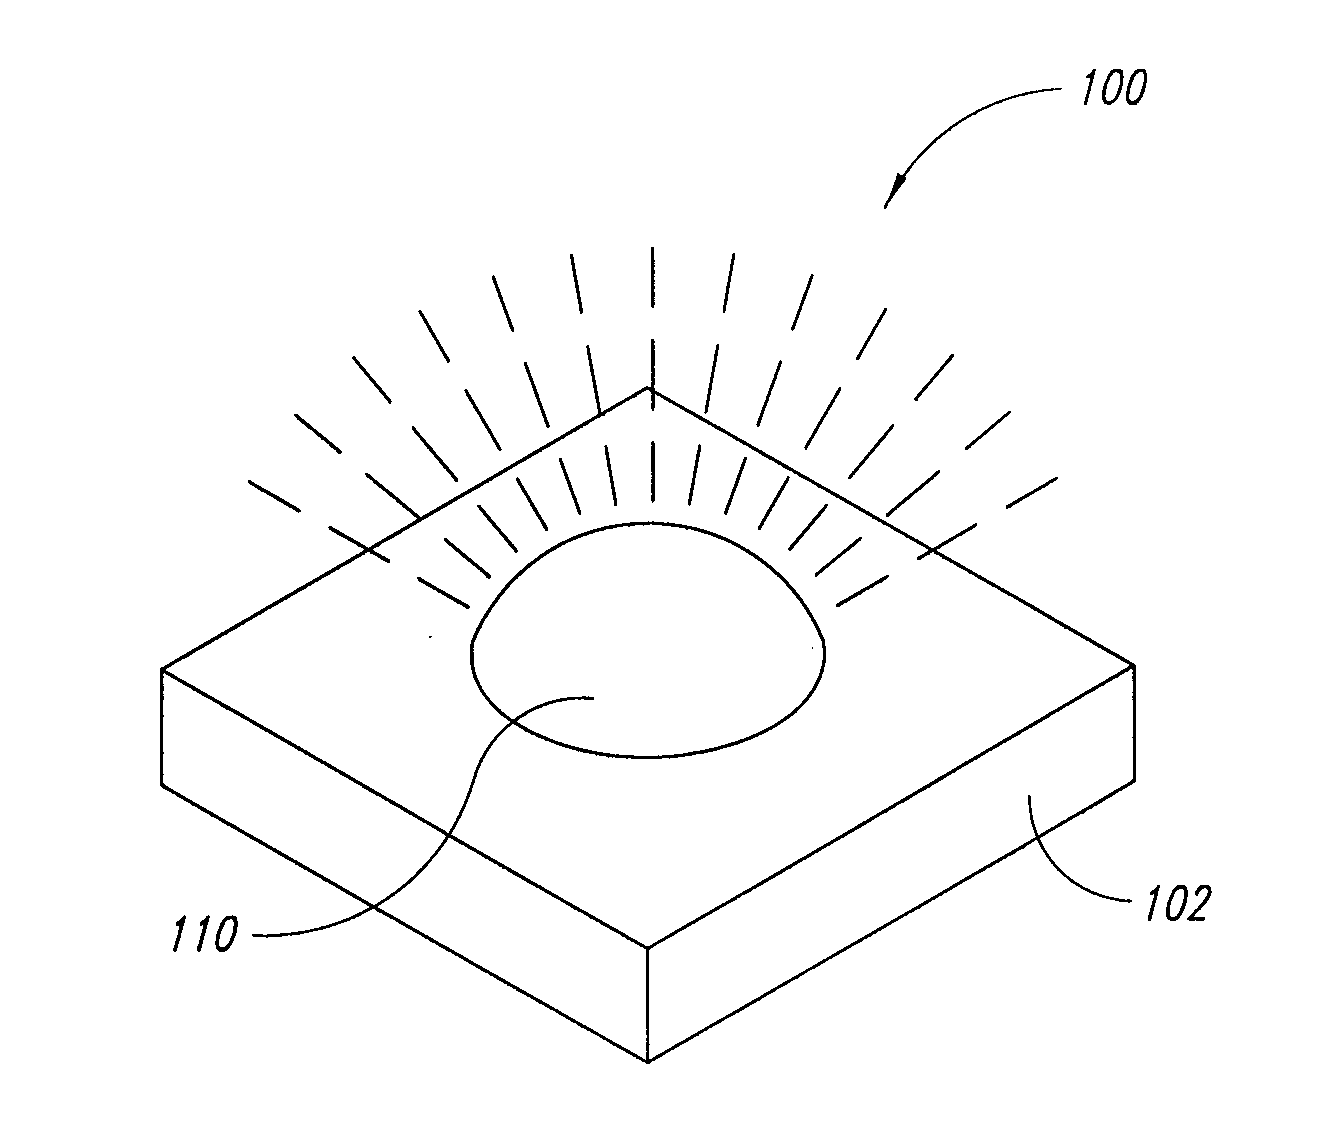 Apparatus, method to change light source color temperature with reduced optical filtering losses